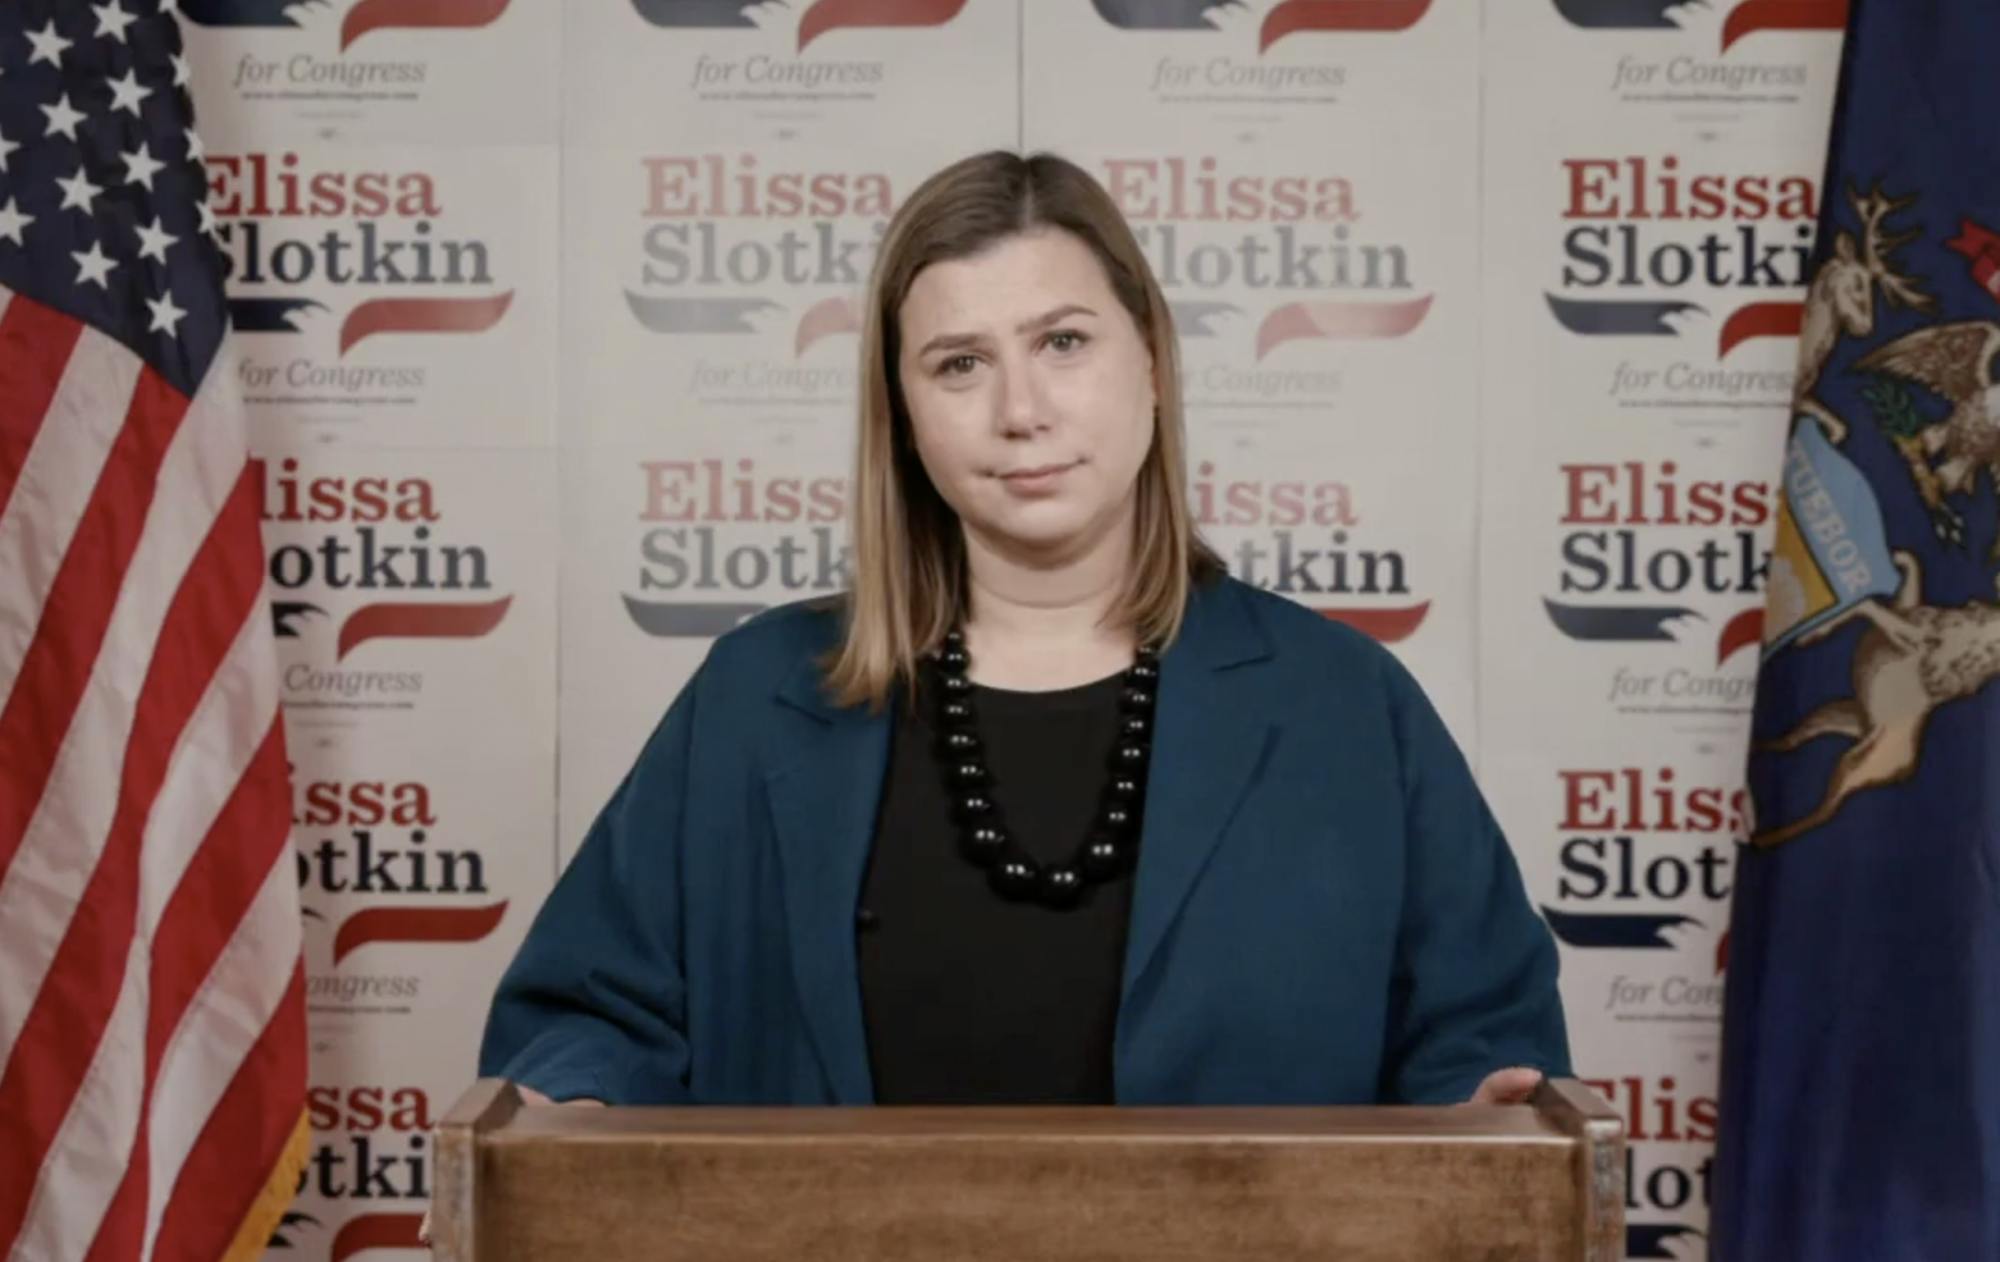 <p>U.S. Rep. Elissa Slotkin was live from Holly, MI to voice her confidence in reelection on Nov. 4, 2020.</p>